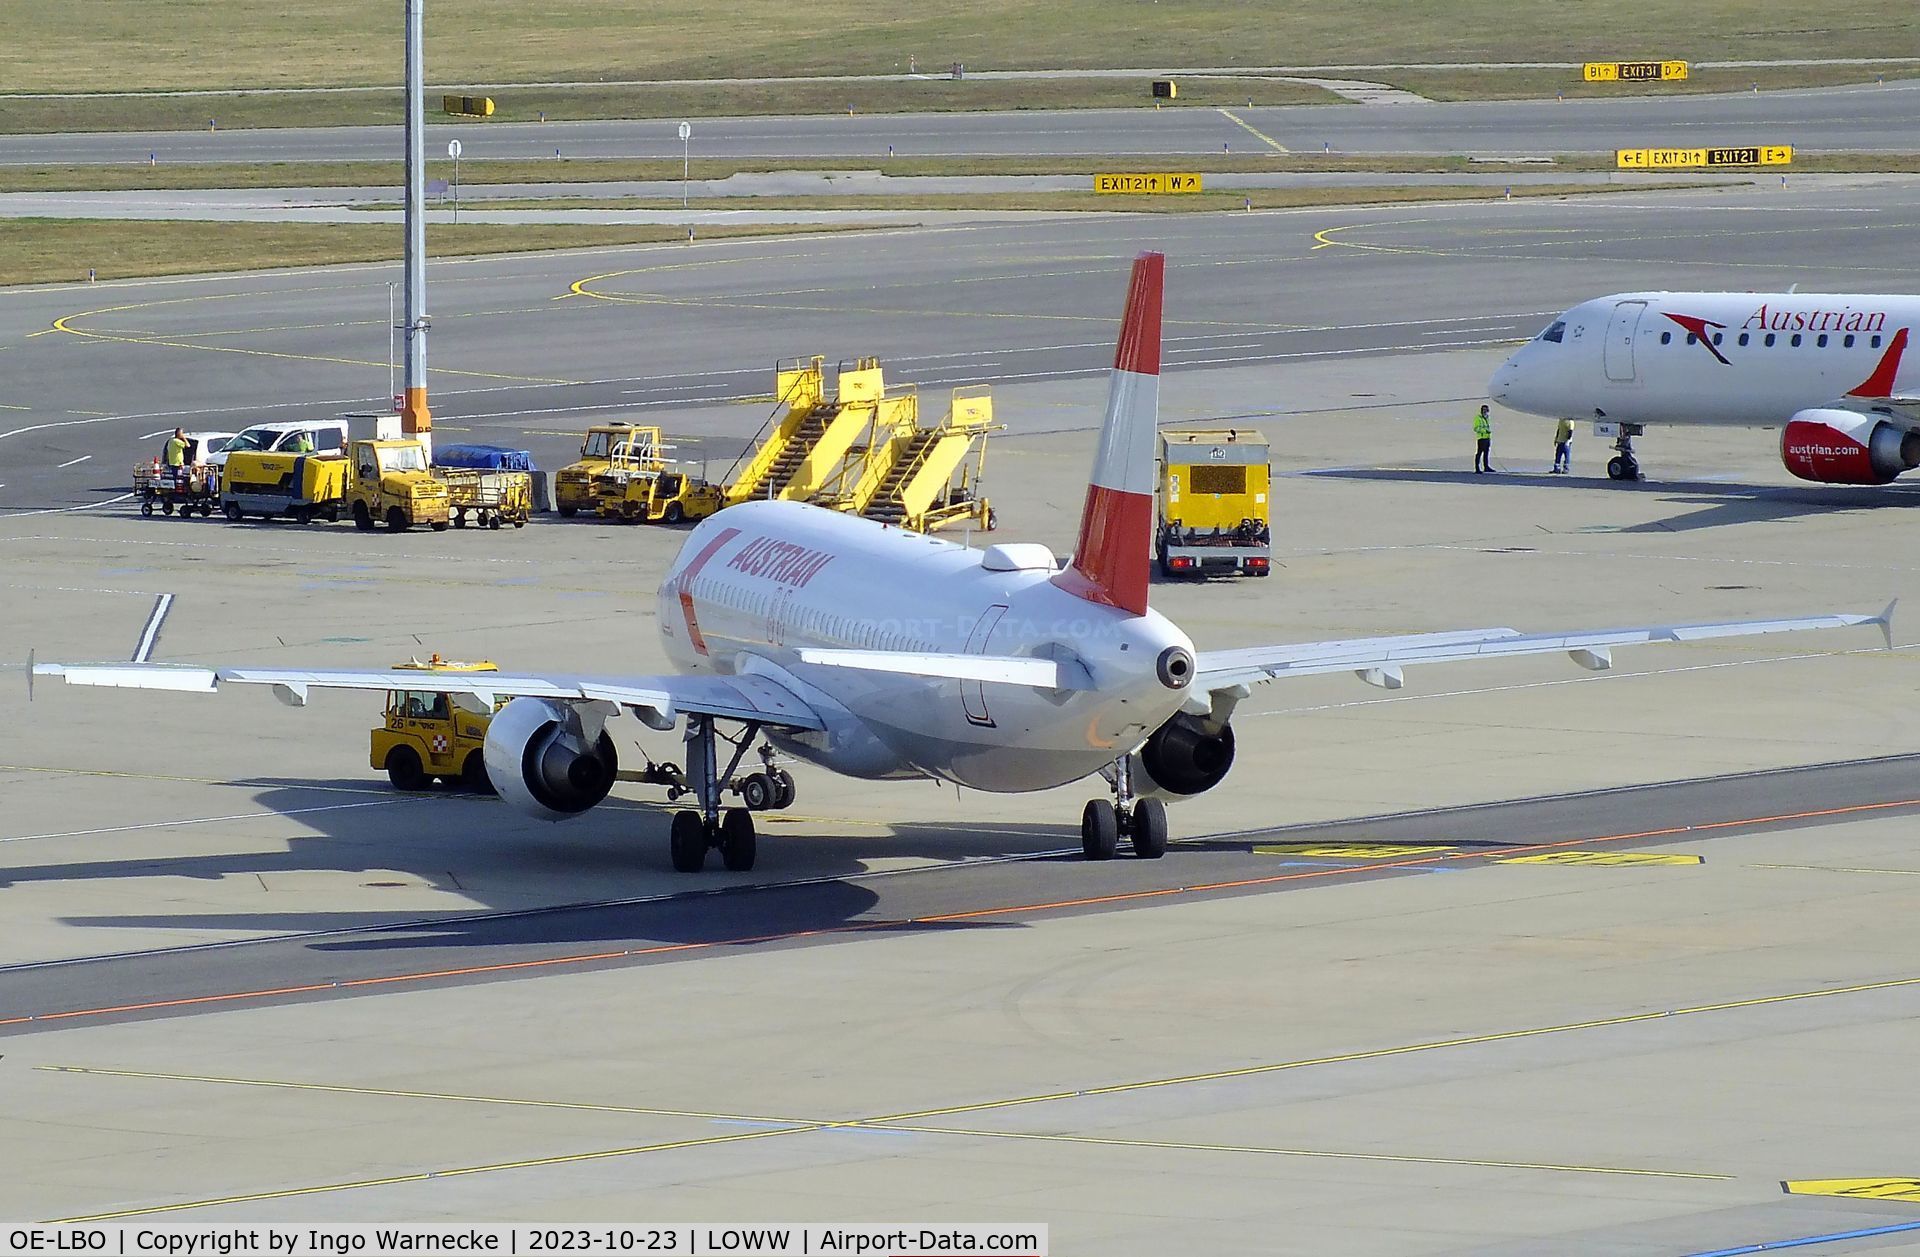 OE-LBO, 1998 Airbus A320-214 C/N 776, Airbus A320-214 of Austrian Airlines at Wien-Schwechat airport